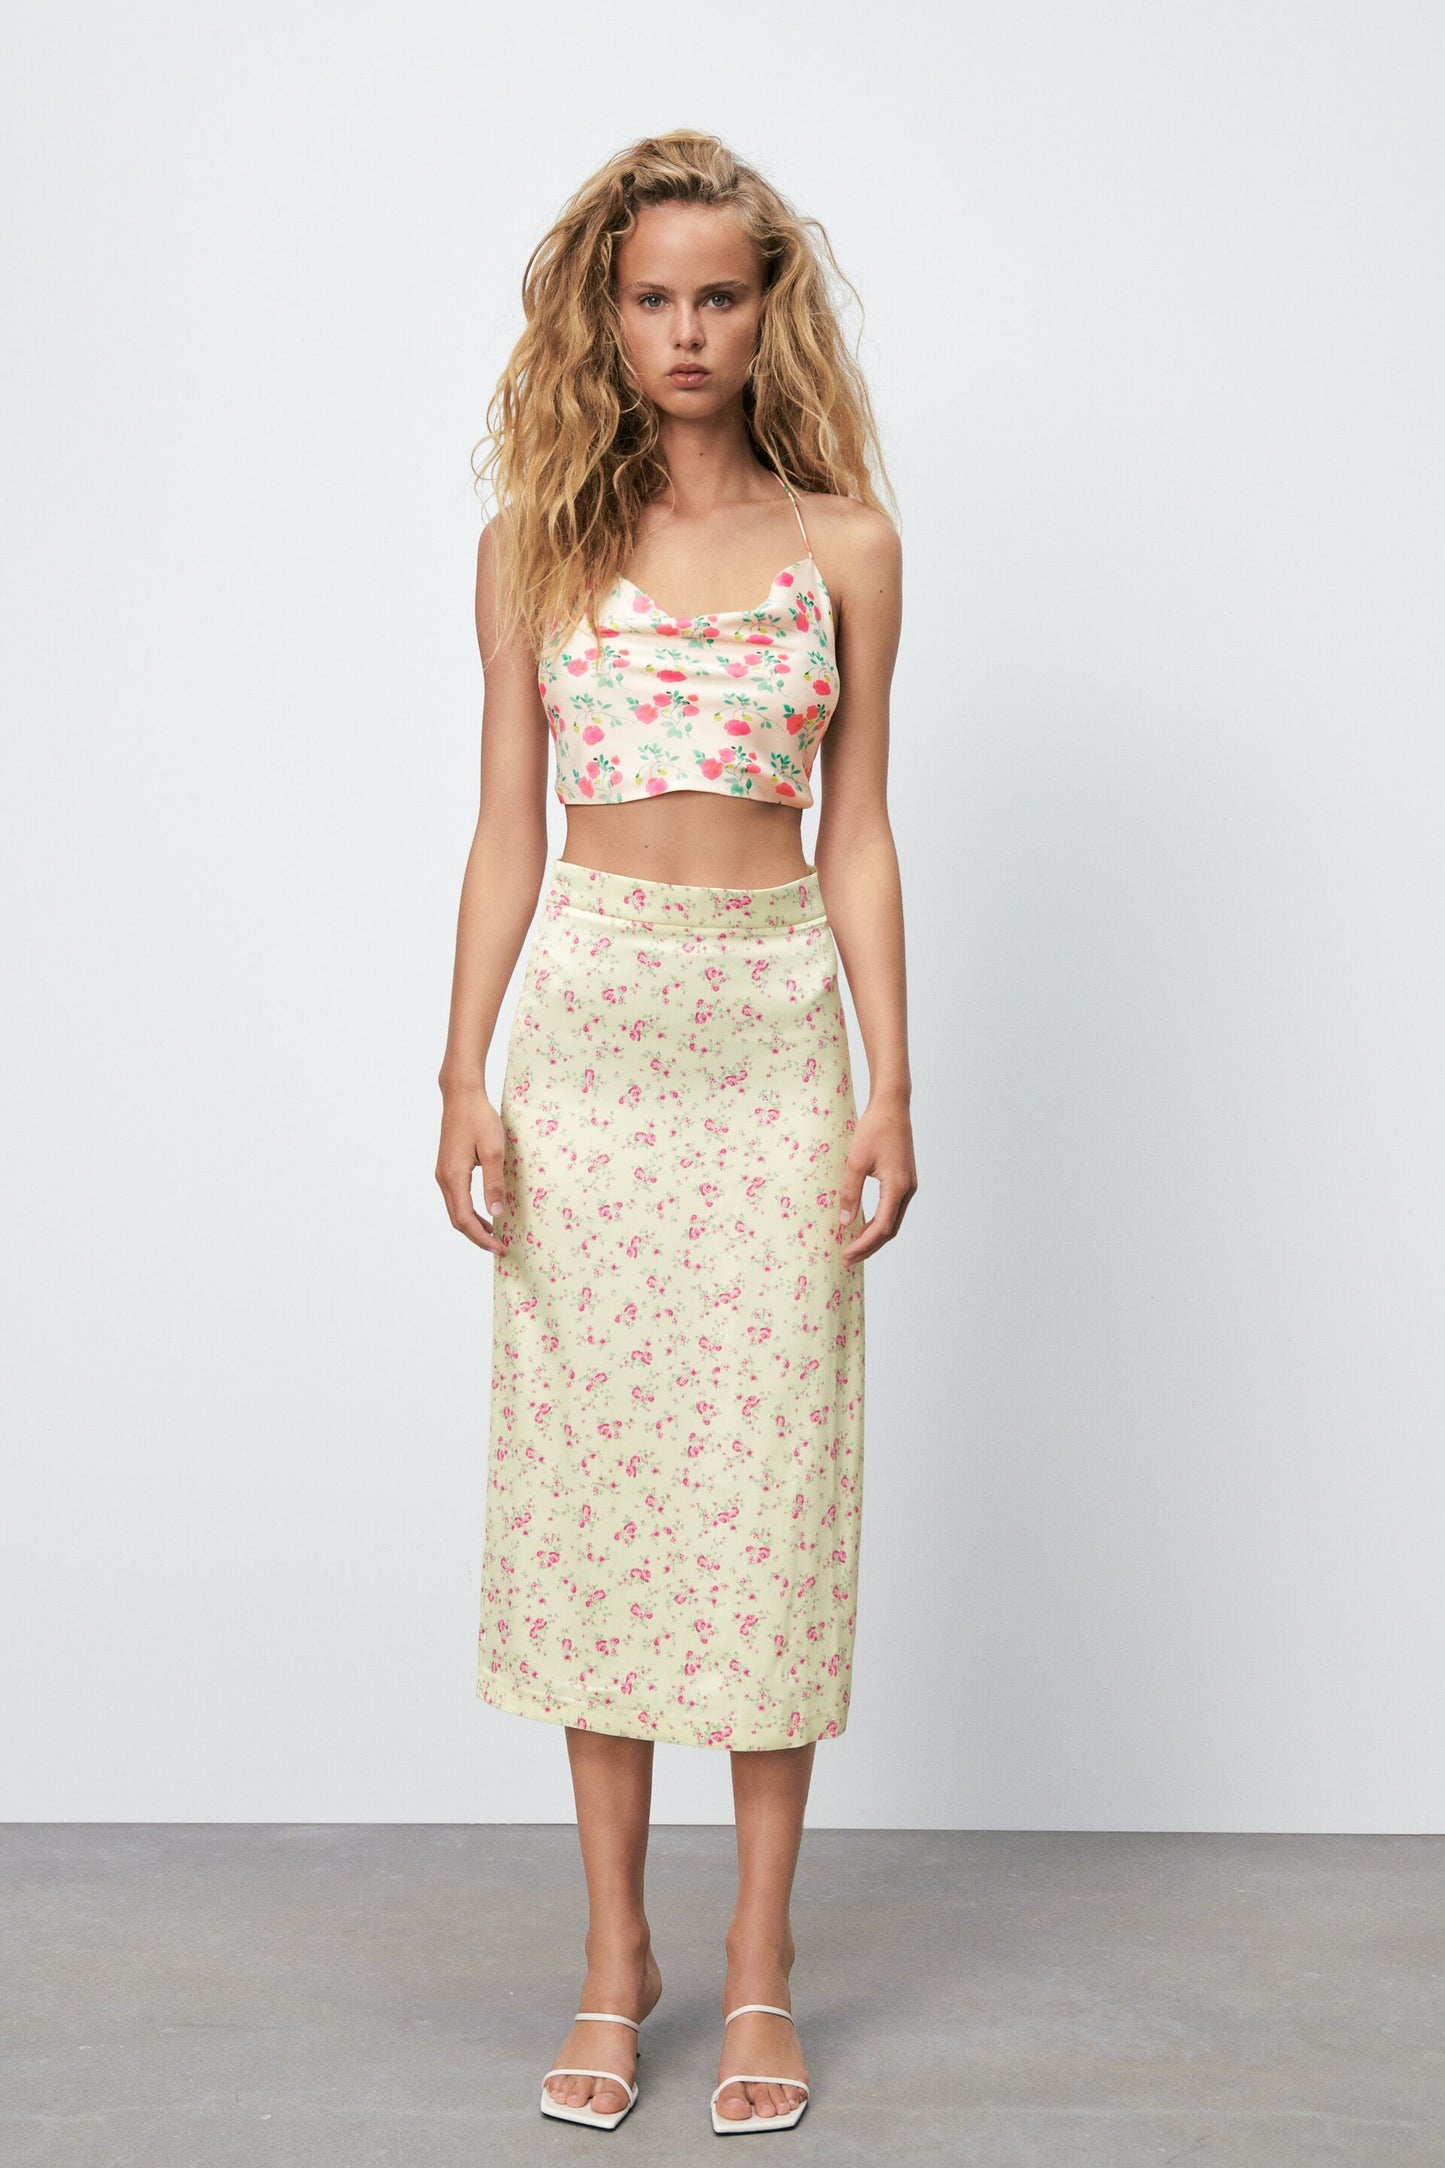 A Floral Top: Zara Floral Crop Top, Tube Tops Are Our Favourite Nostalgic  Spring Trend